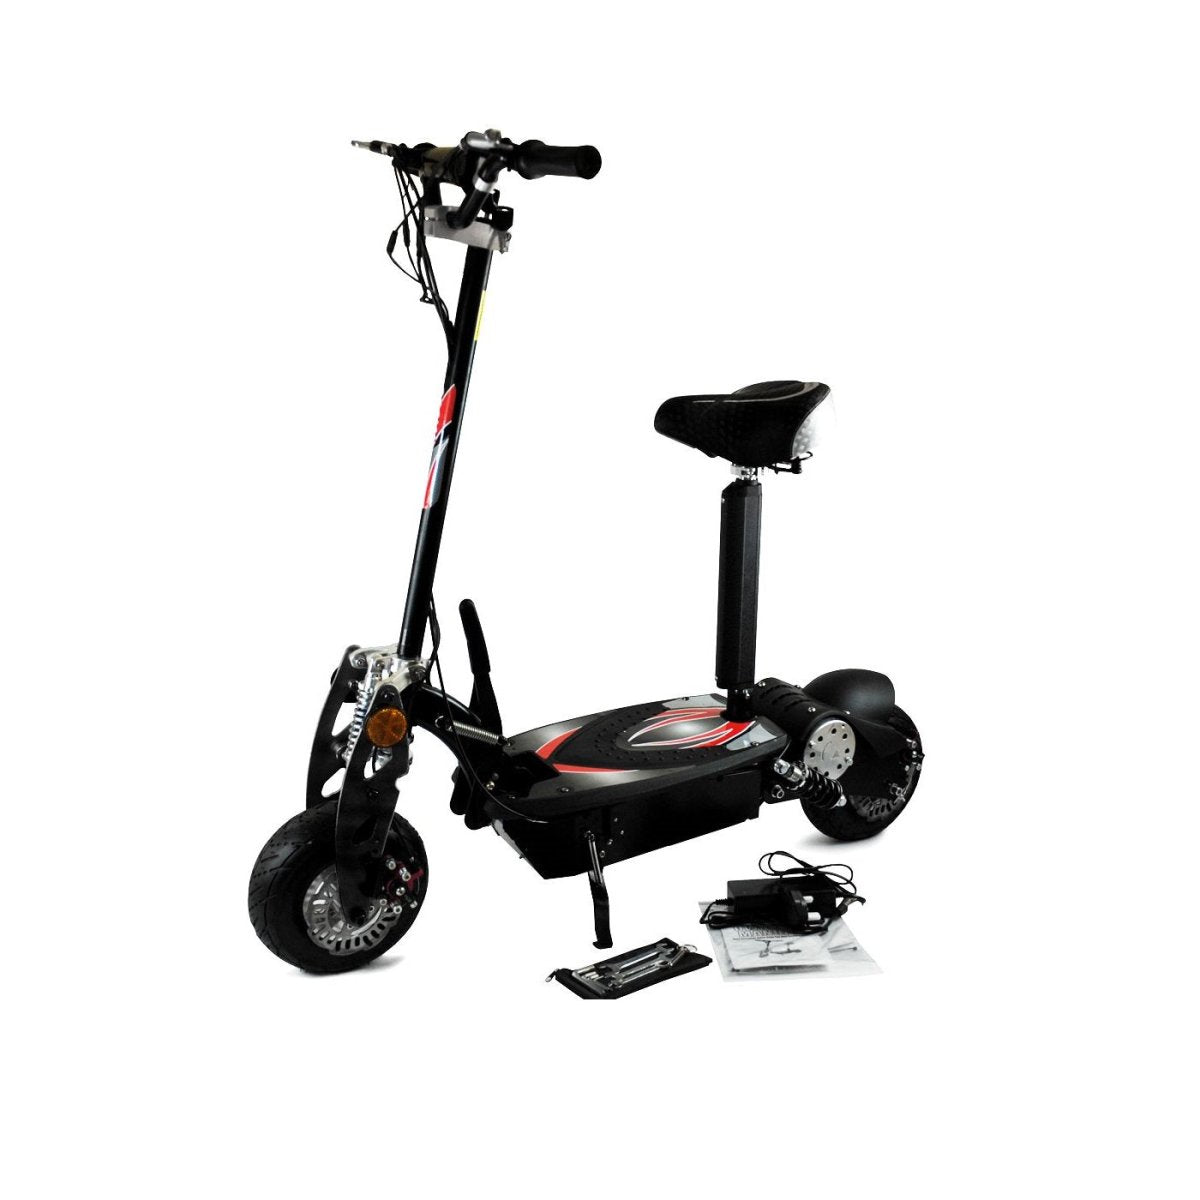 Powerful Electric Scooter with Suspension